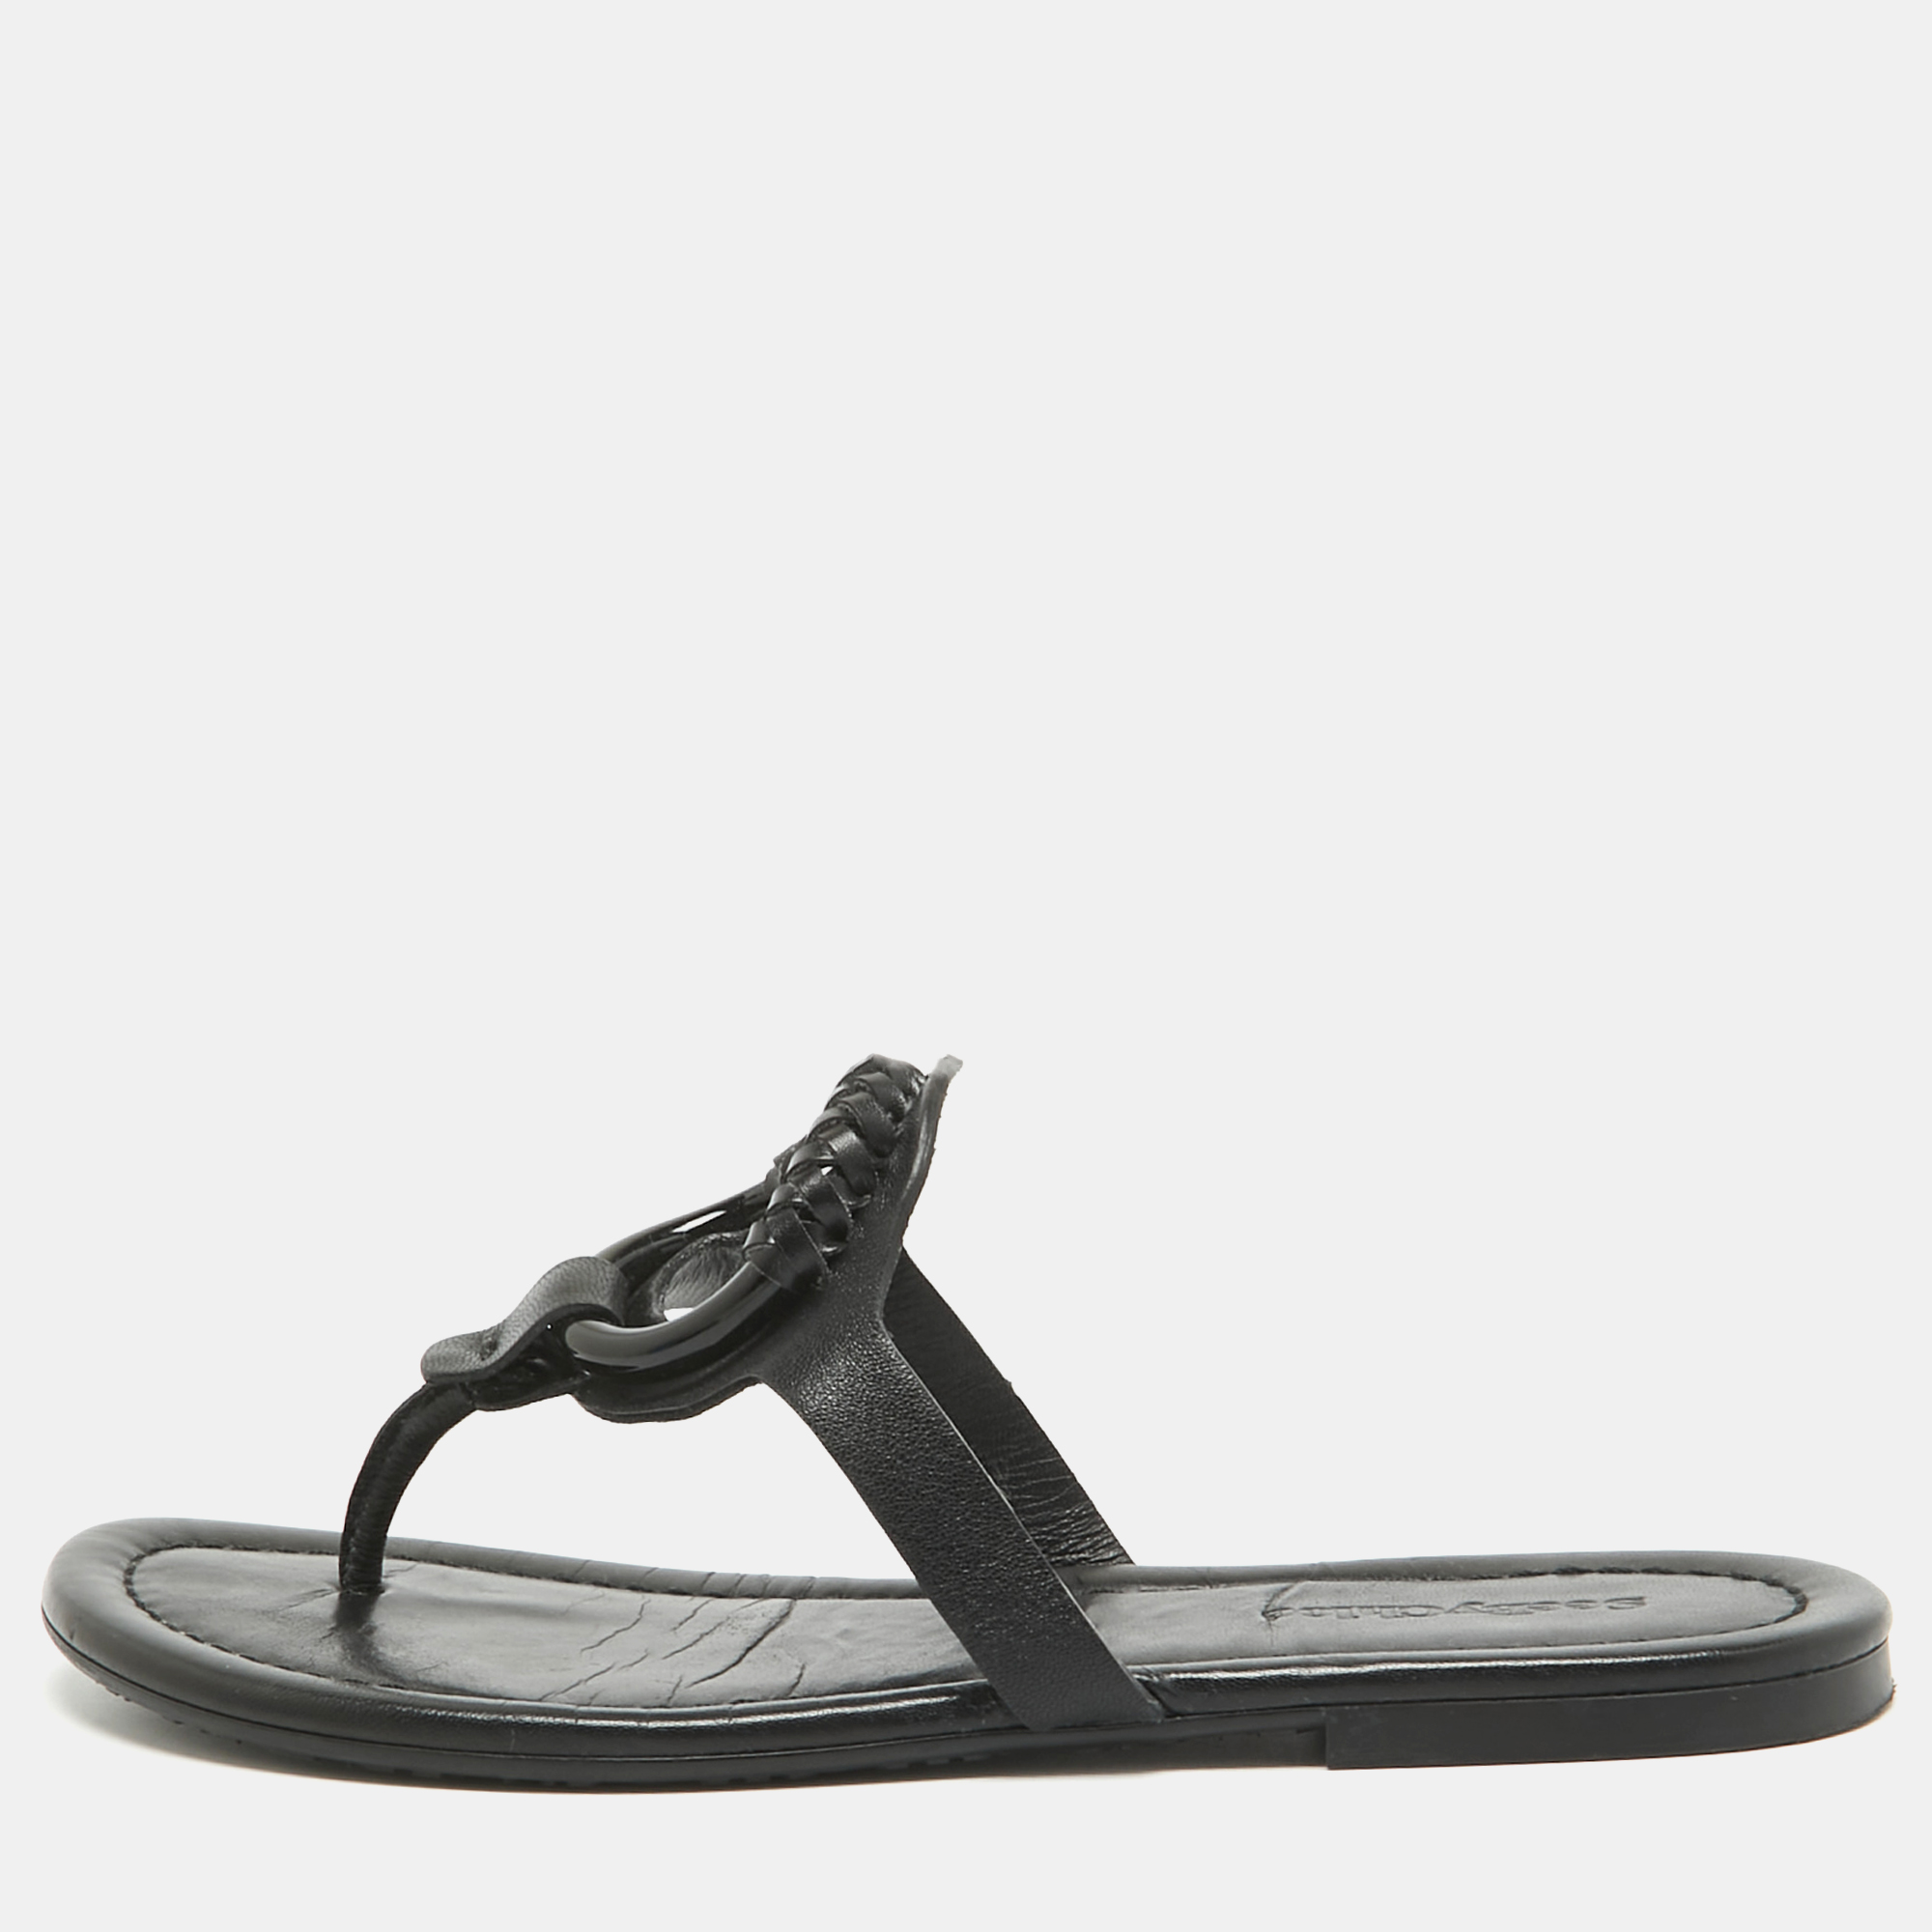 Pre-owned See By Chloé Black Leather Hana Flat Slides Size 36